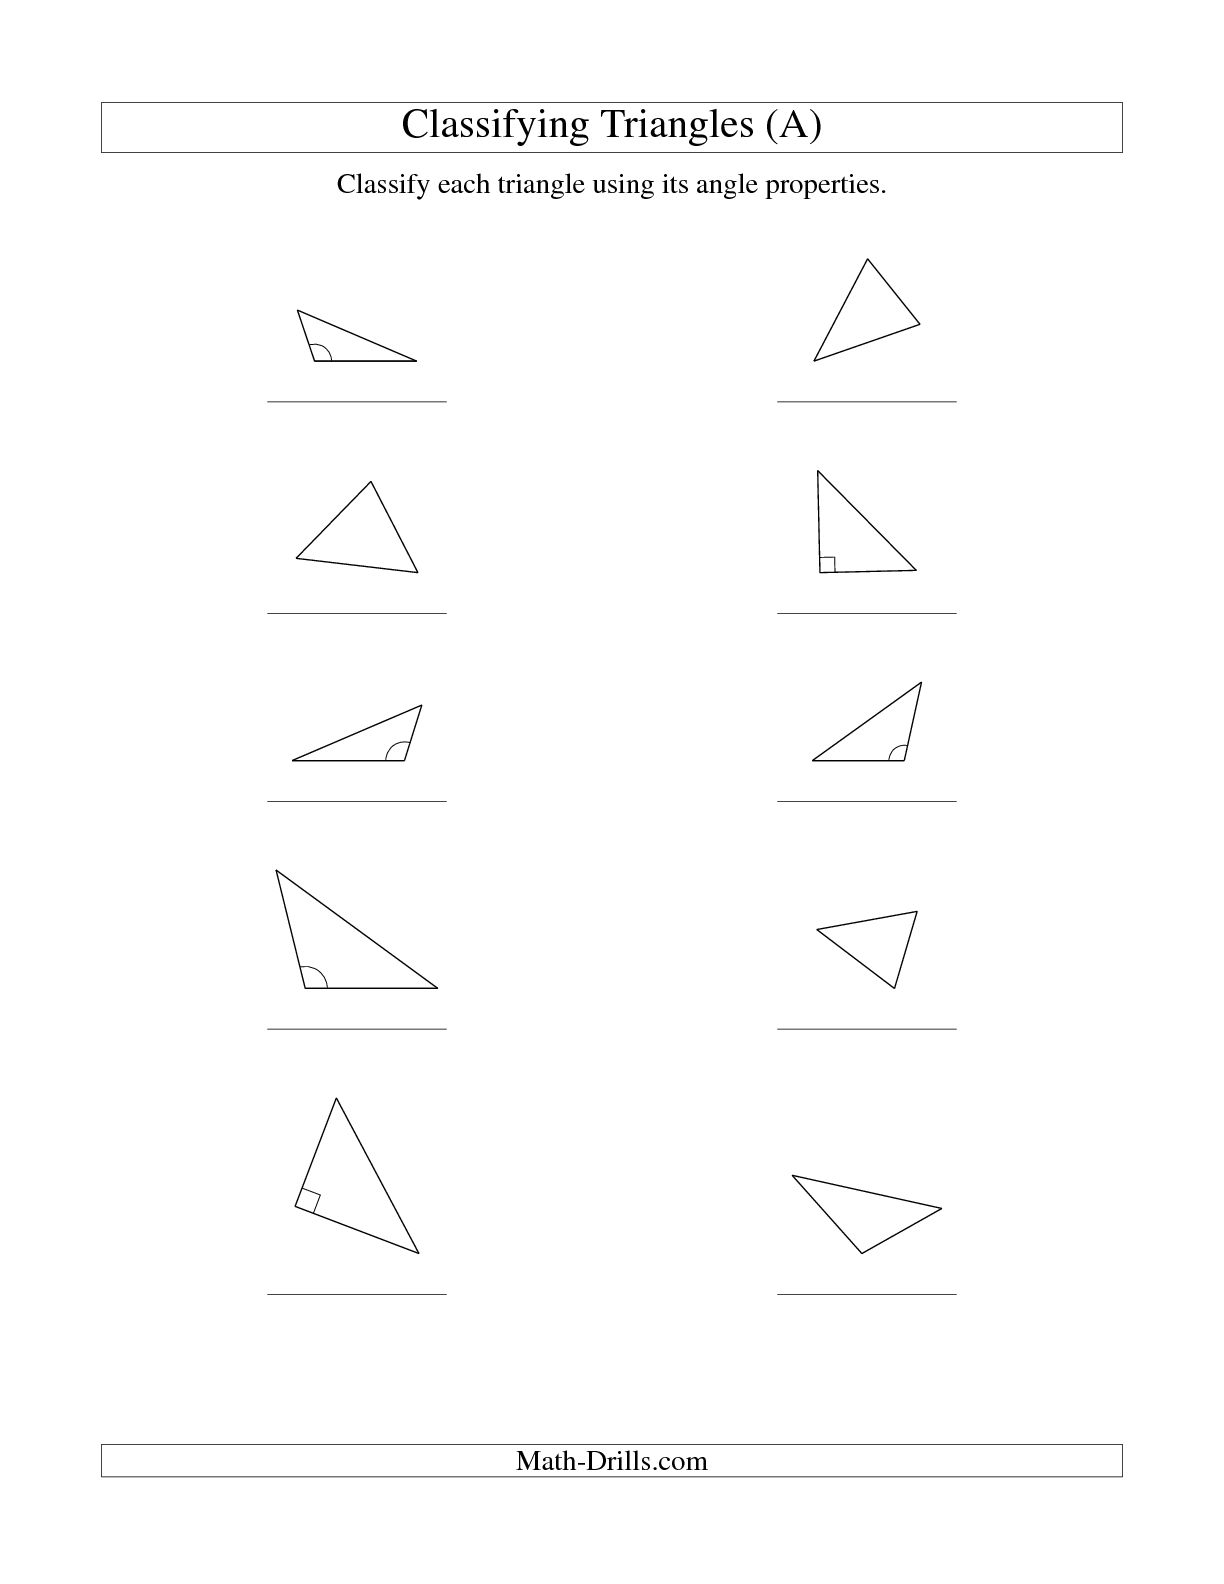 Classifying Triangles by Angles Worksheet